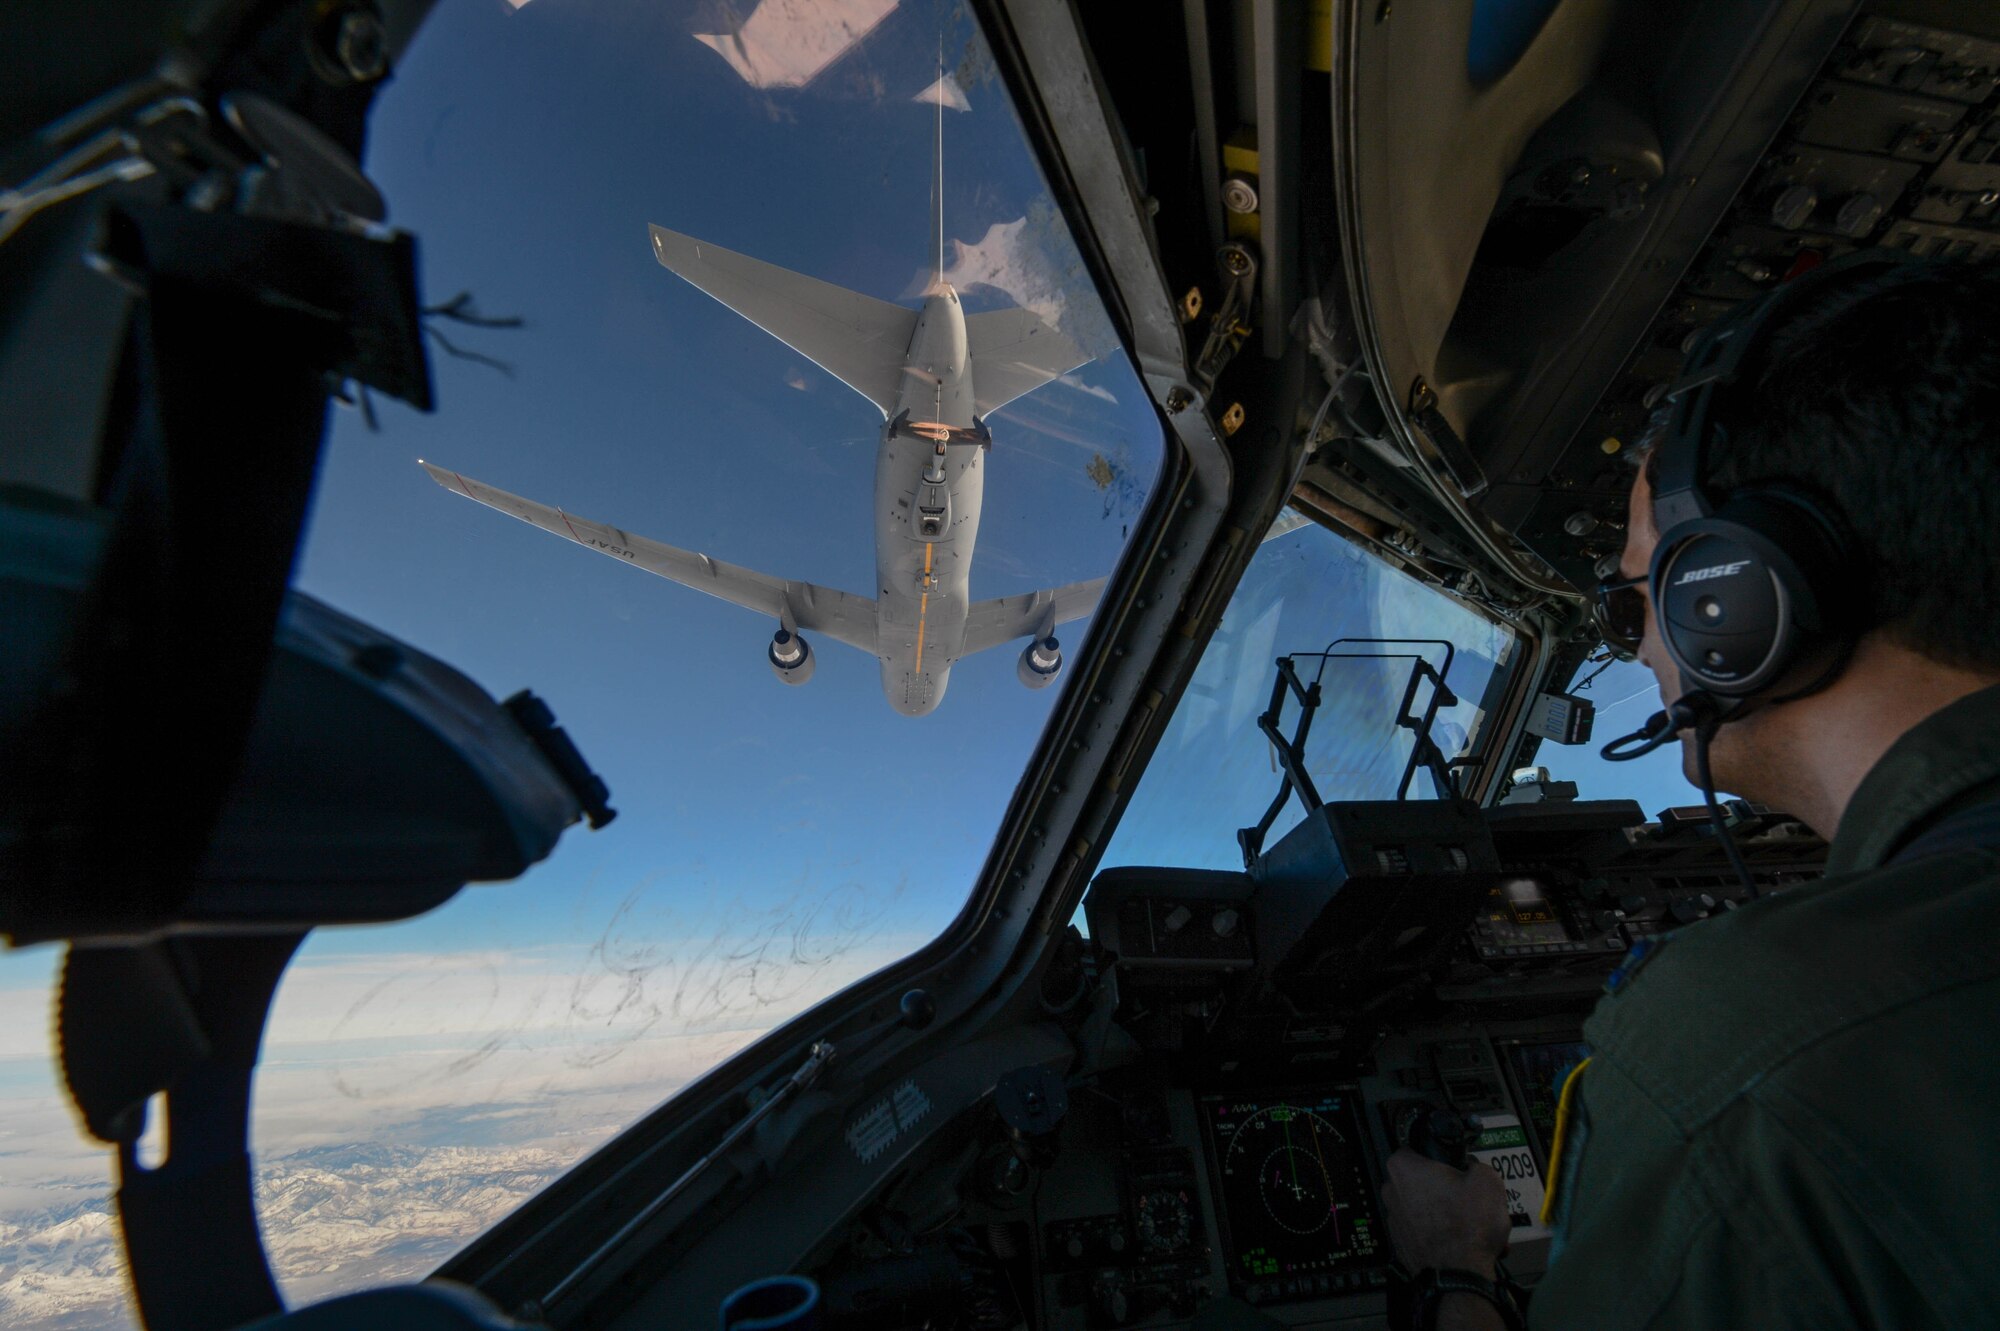 Capt. Wade Gallup, 7th Airlift Squadron pilot, approaches a KC-46 Pegasus during refueling training over central Wash., Jan. 30, 2019. With its multiple options the KC-46 can refuel Air Force, Navy, Marine Corps and partner nation aircraft. (U.S. Air Force photo by A1C Sara Hoerichs)